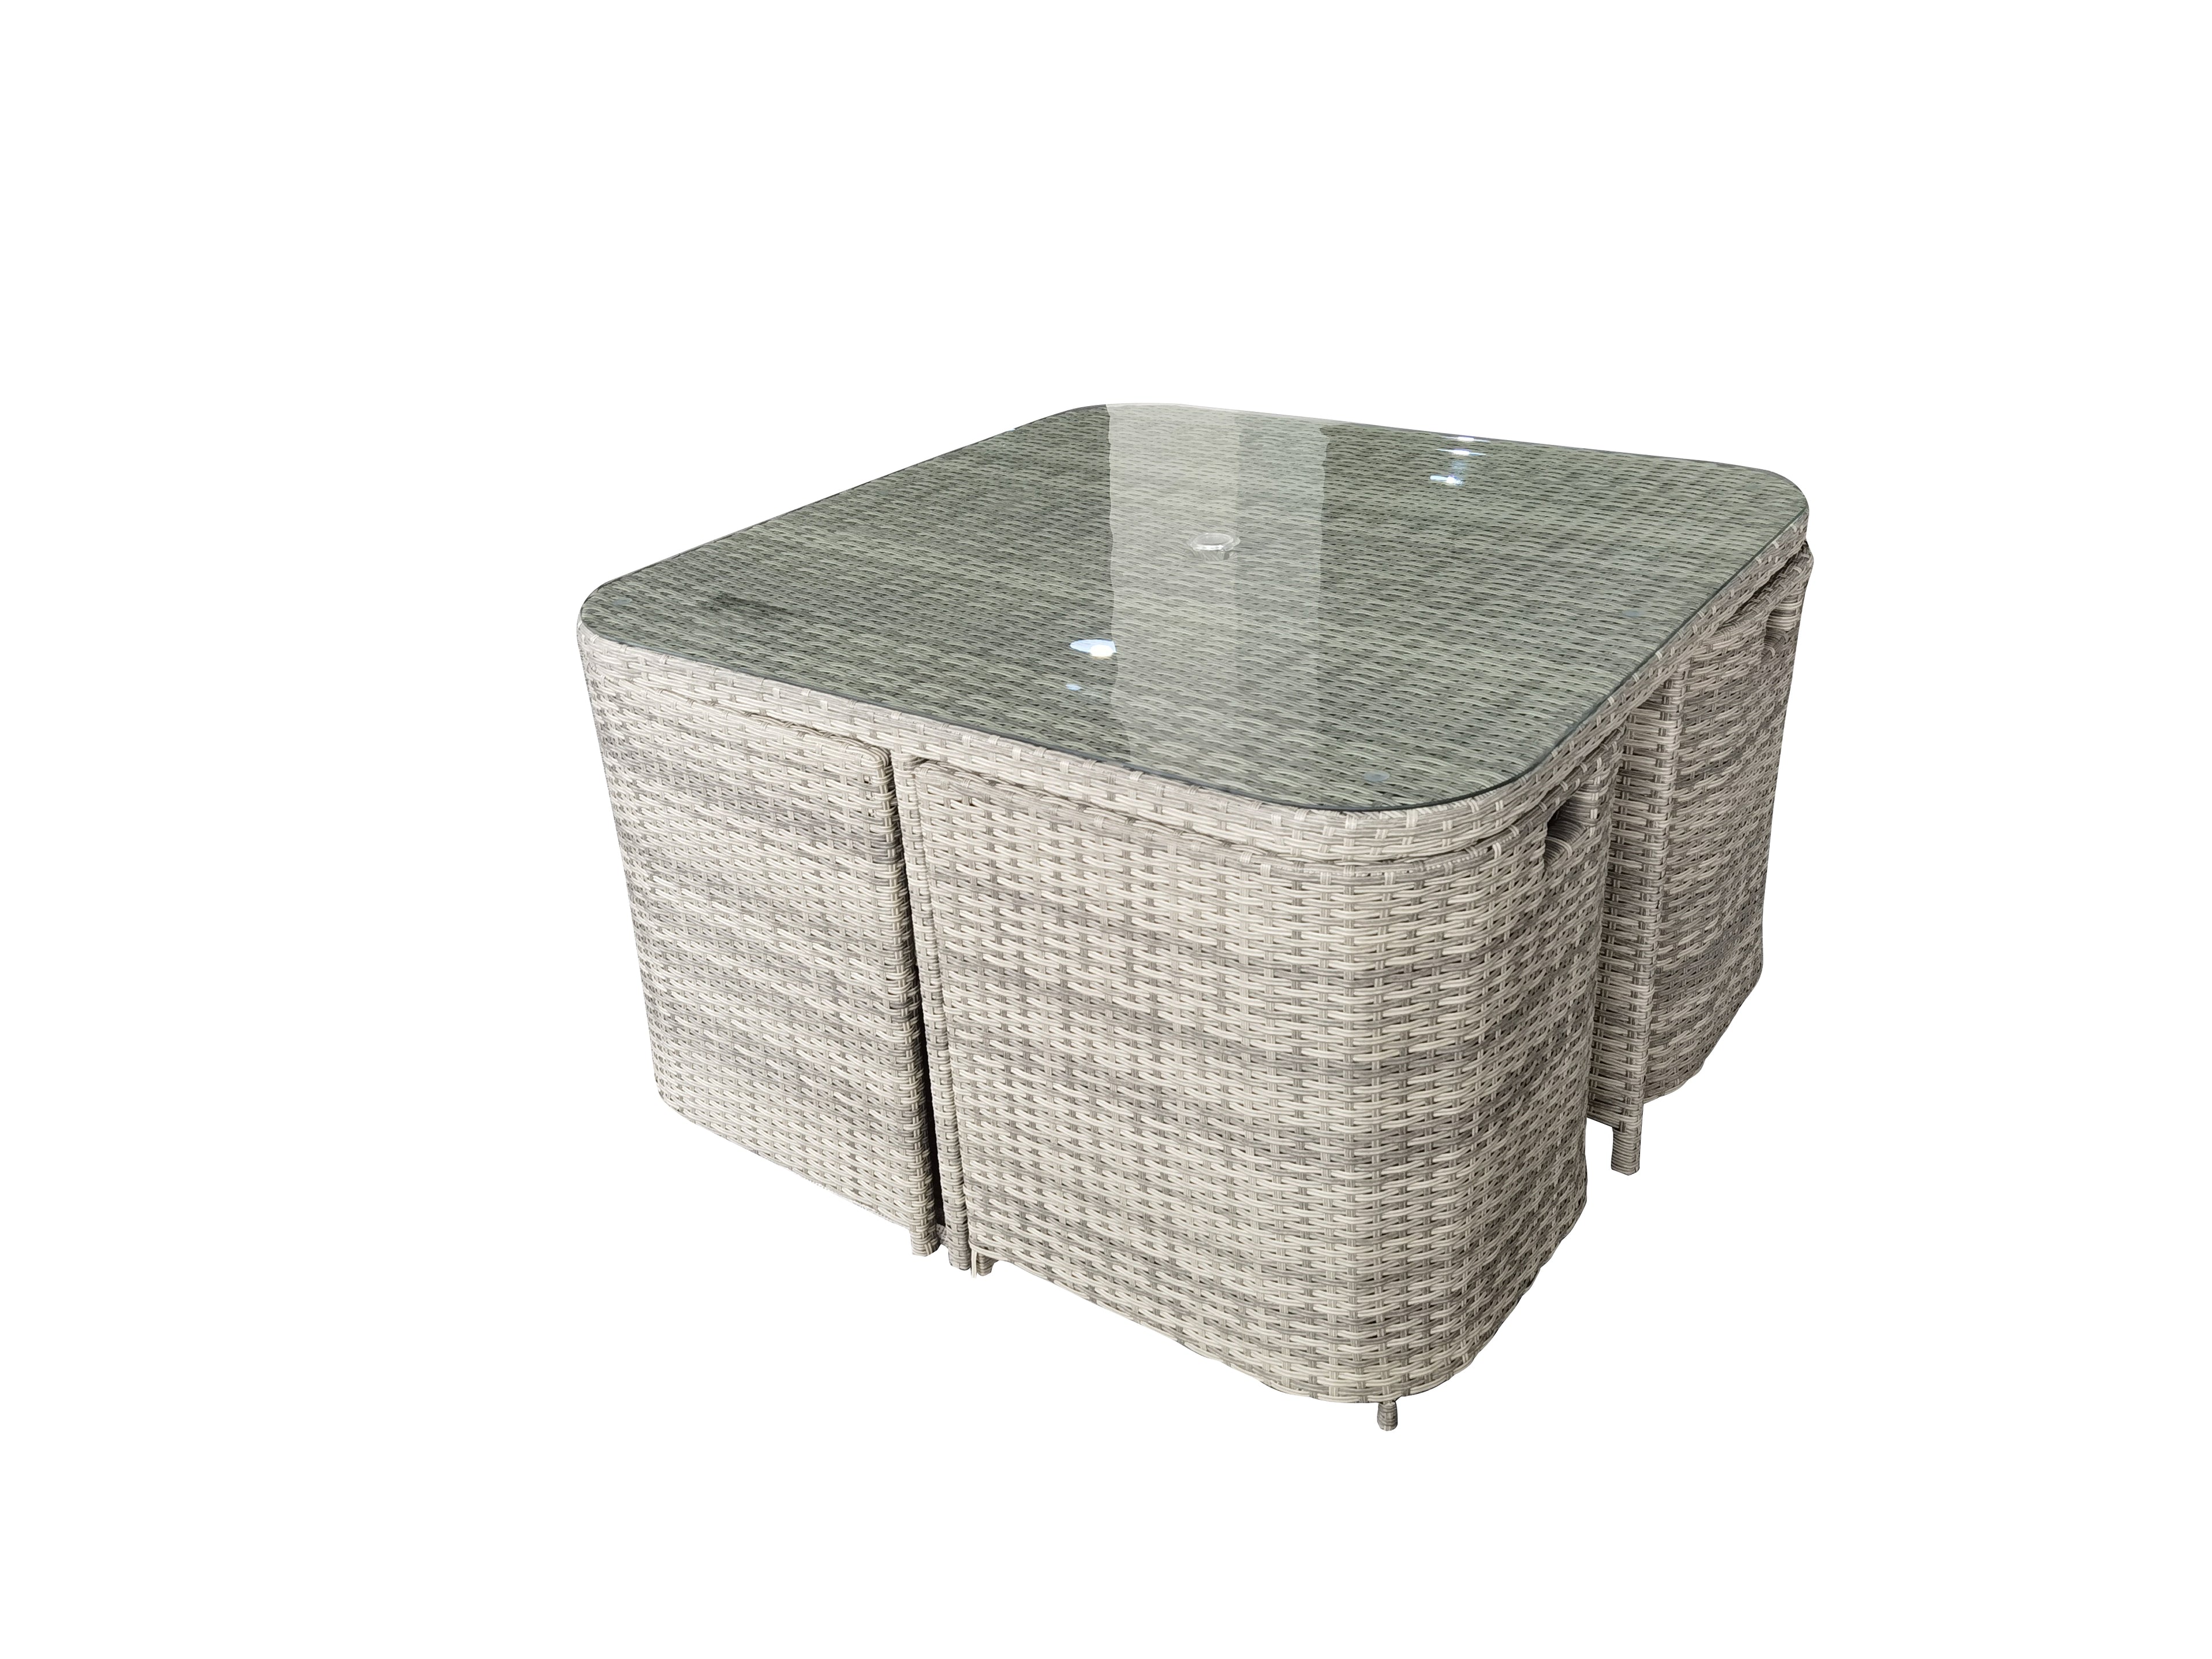 Seville 4 Seater Outdoor Furniture Cube Set with Cover